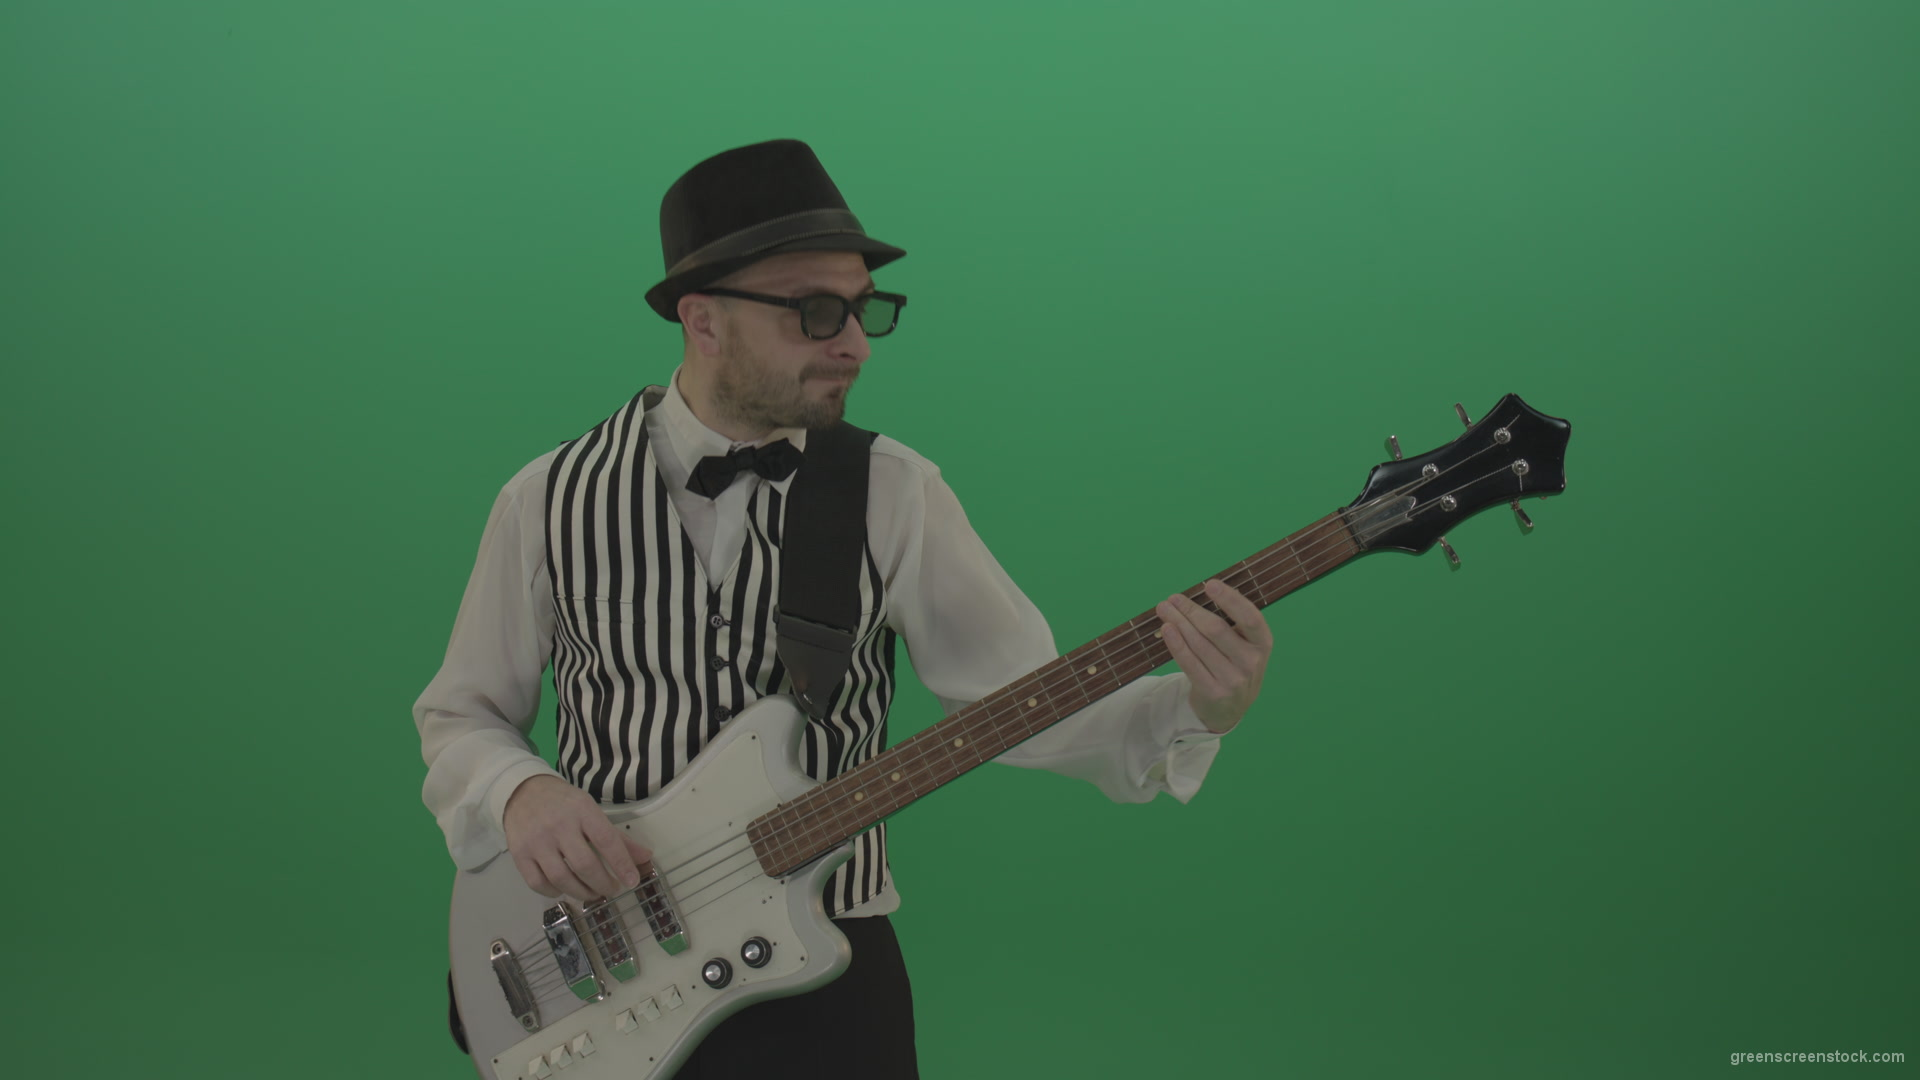 Guitar-player-browses-the-bass-guitar-playing-solo-and-charismatically-shows-facial-expressions_004 Green Screen Stock